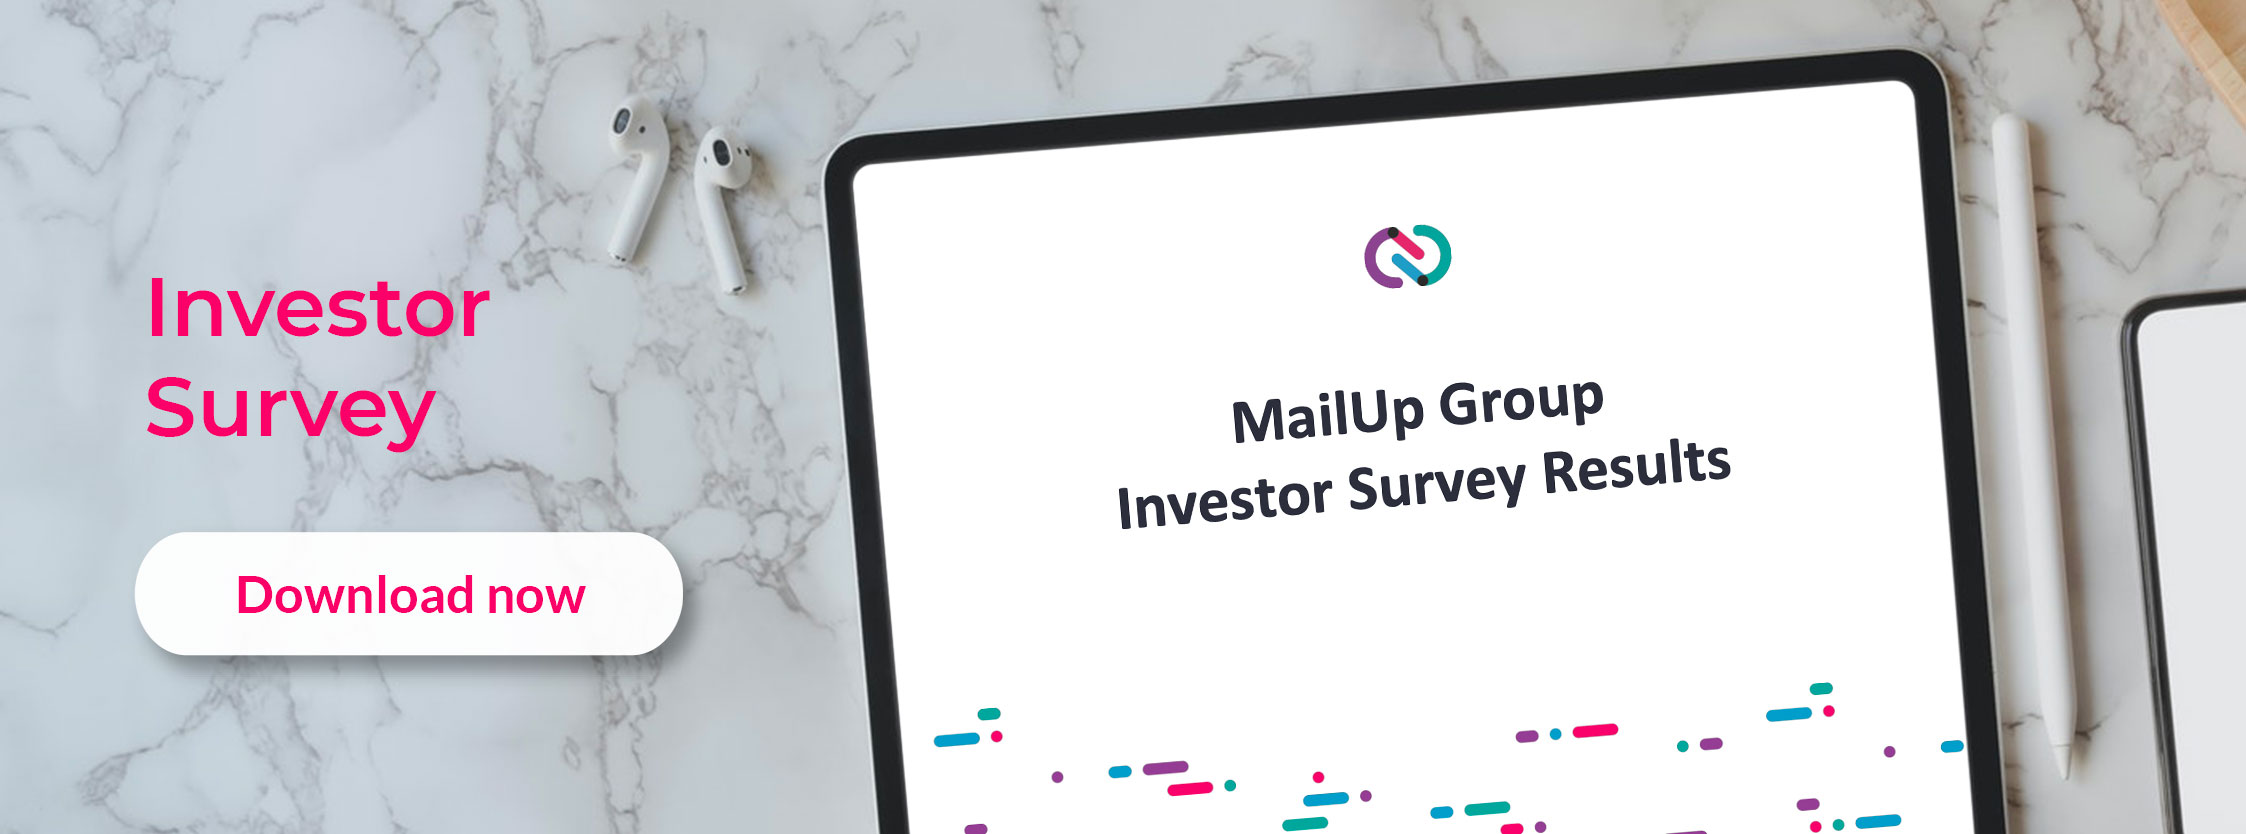 Download the Investor Survey results